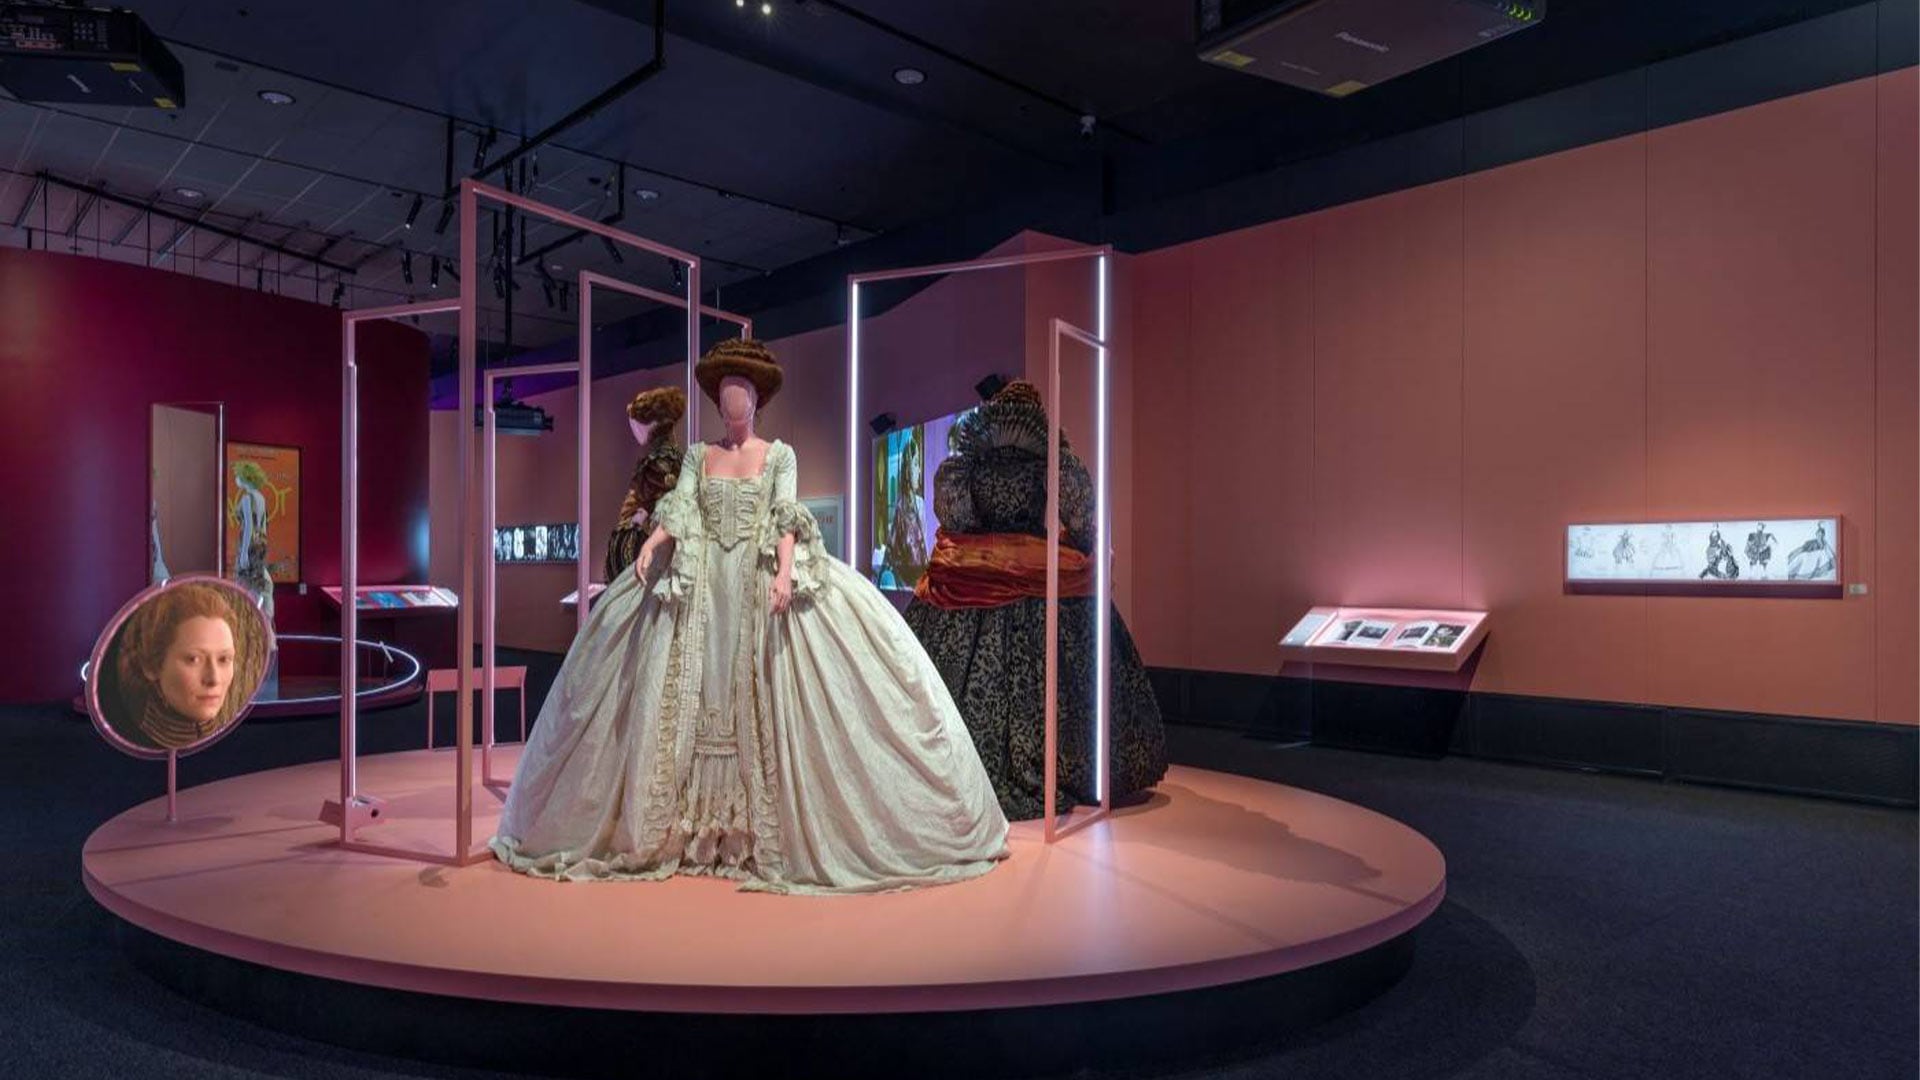 An exhibition at ArtScience Museum that showcases of a costume to celebrate women in film